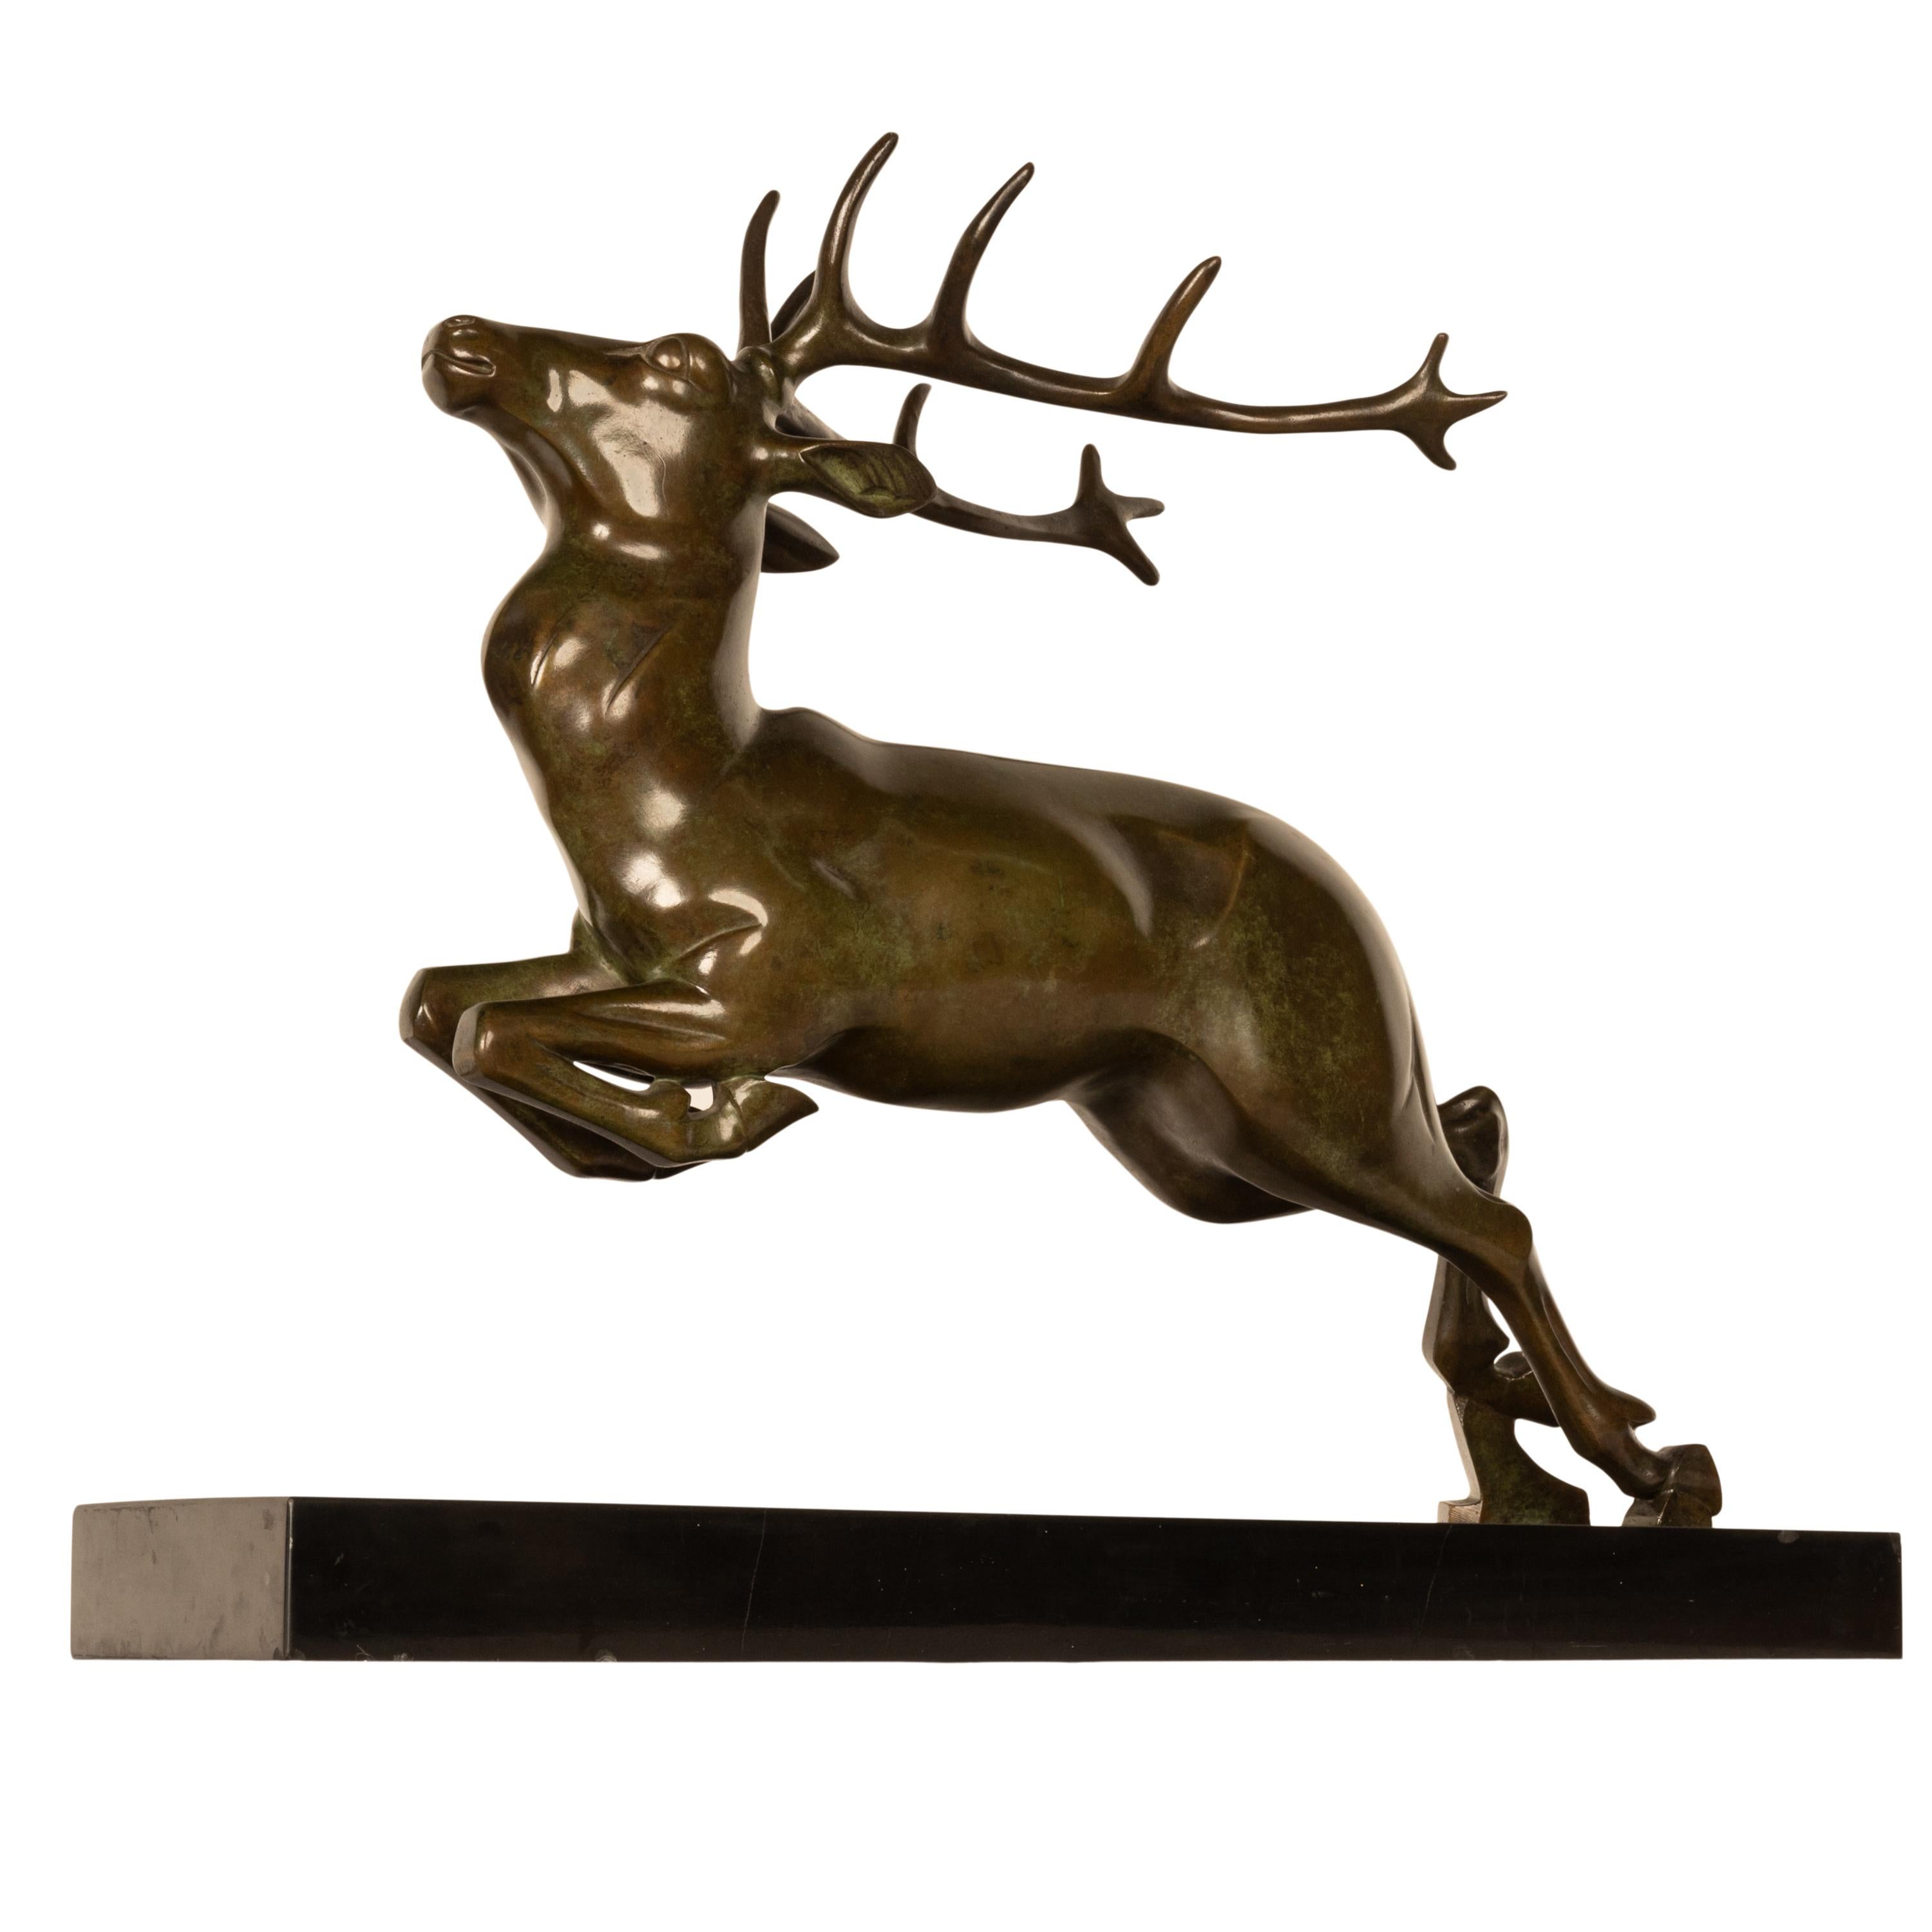 A fine & large antique French Art Deco Bronze leaping stag sculpture/statue, by Georges H. Laurent (1880-1940), circa 1925.
Georges H. Laurent was known for his animal subjects and this bronze is a striking example of his finest work, the bronze